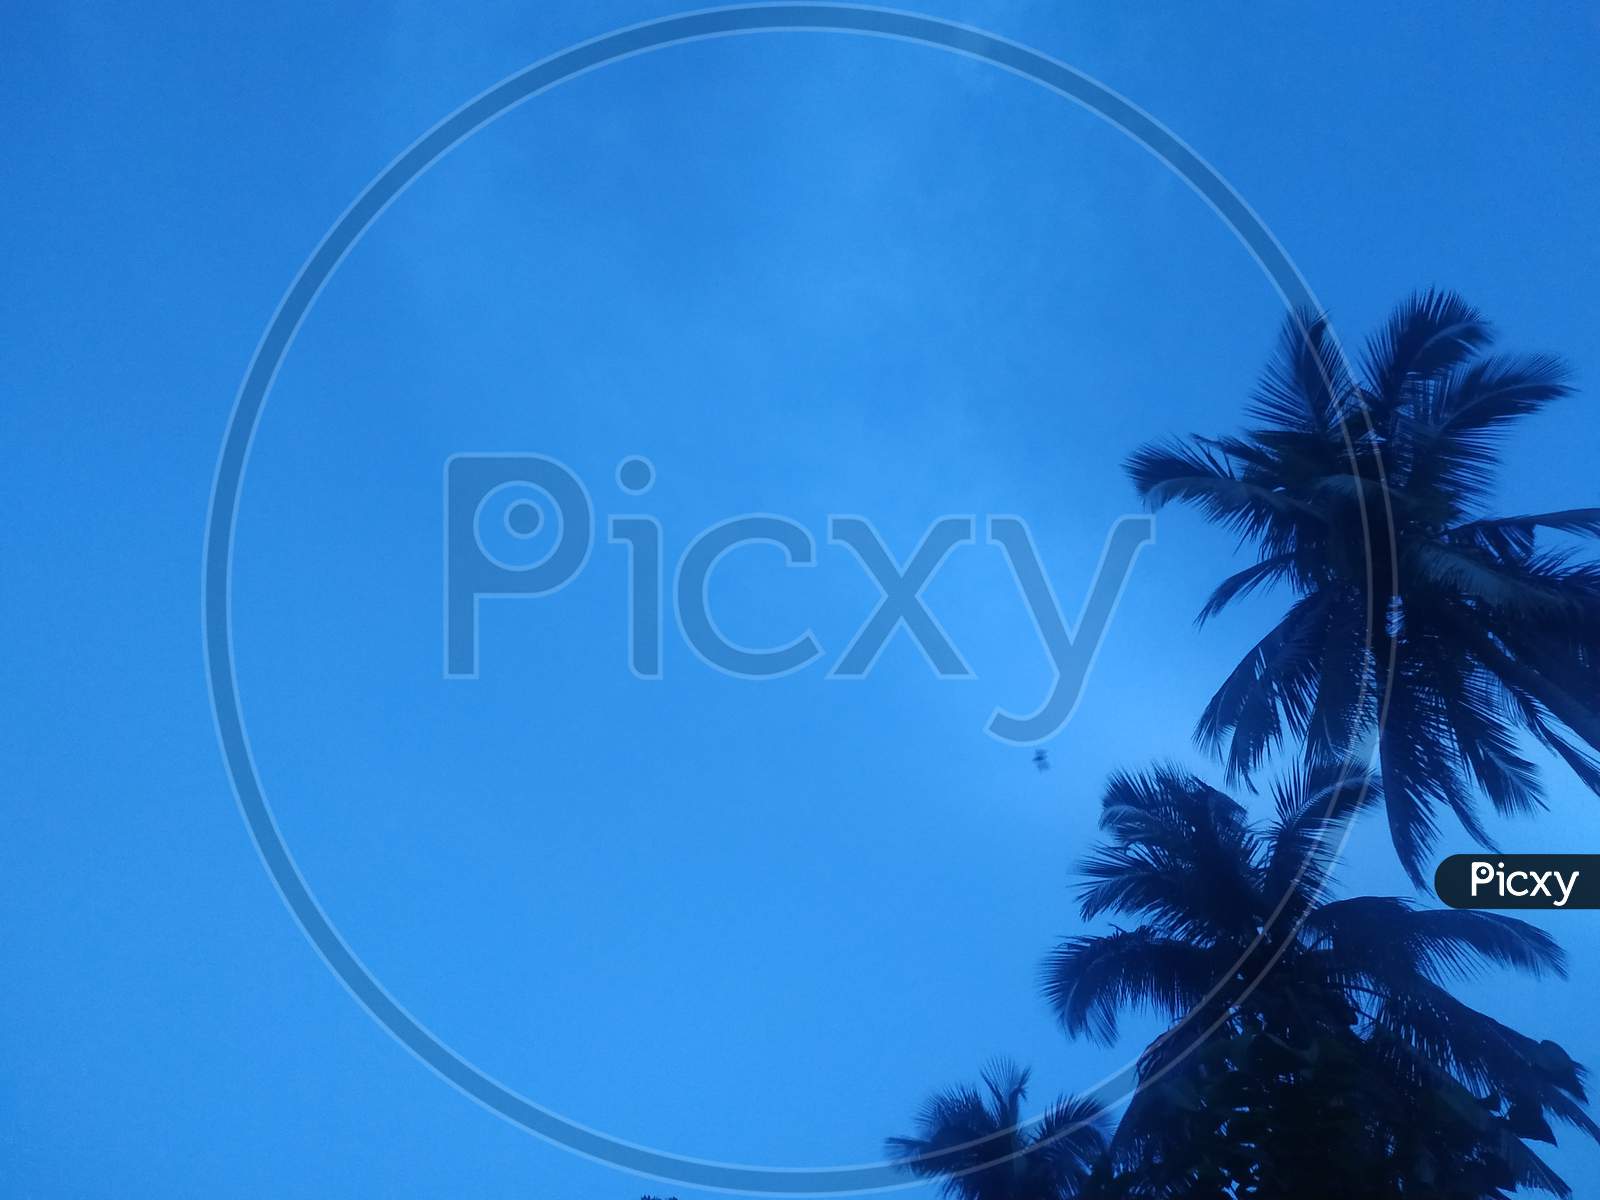 Evening time sky view background